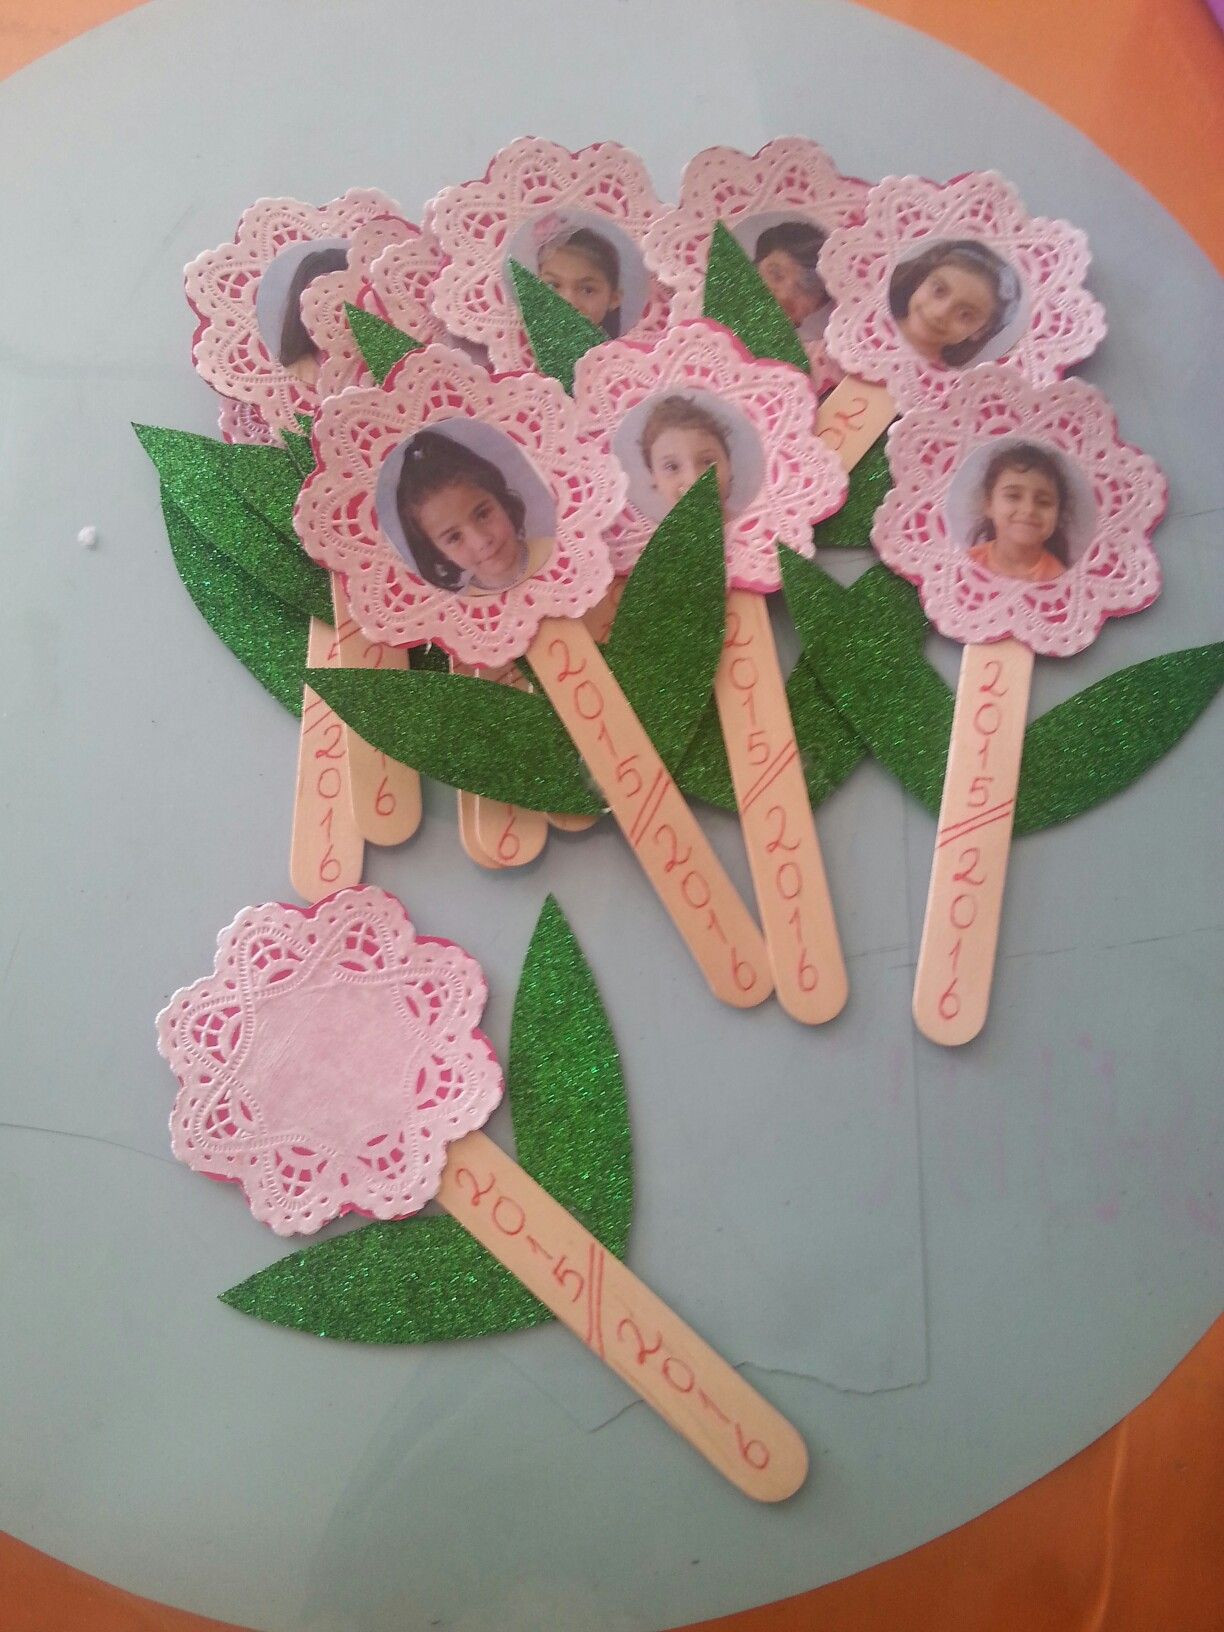 Mothers Day Craft For Toddlers
 10 Marvellous Mother s Day Crafts For Kids That They ll